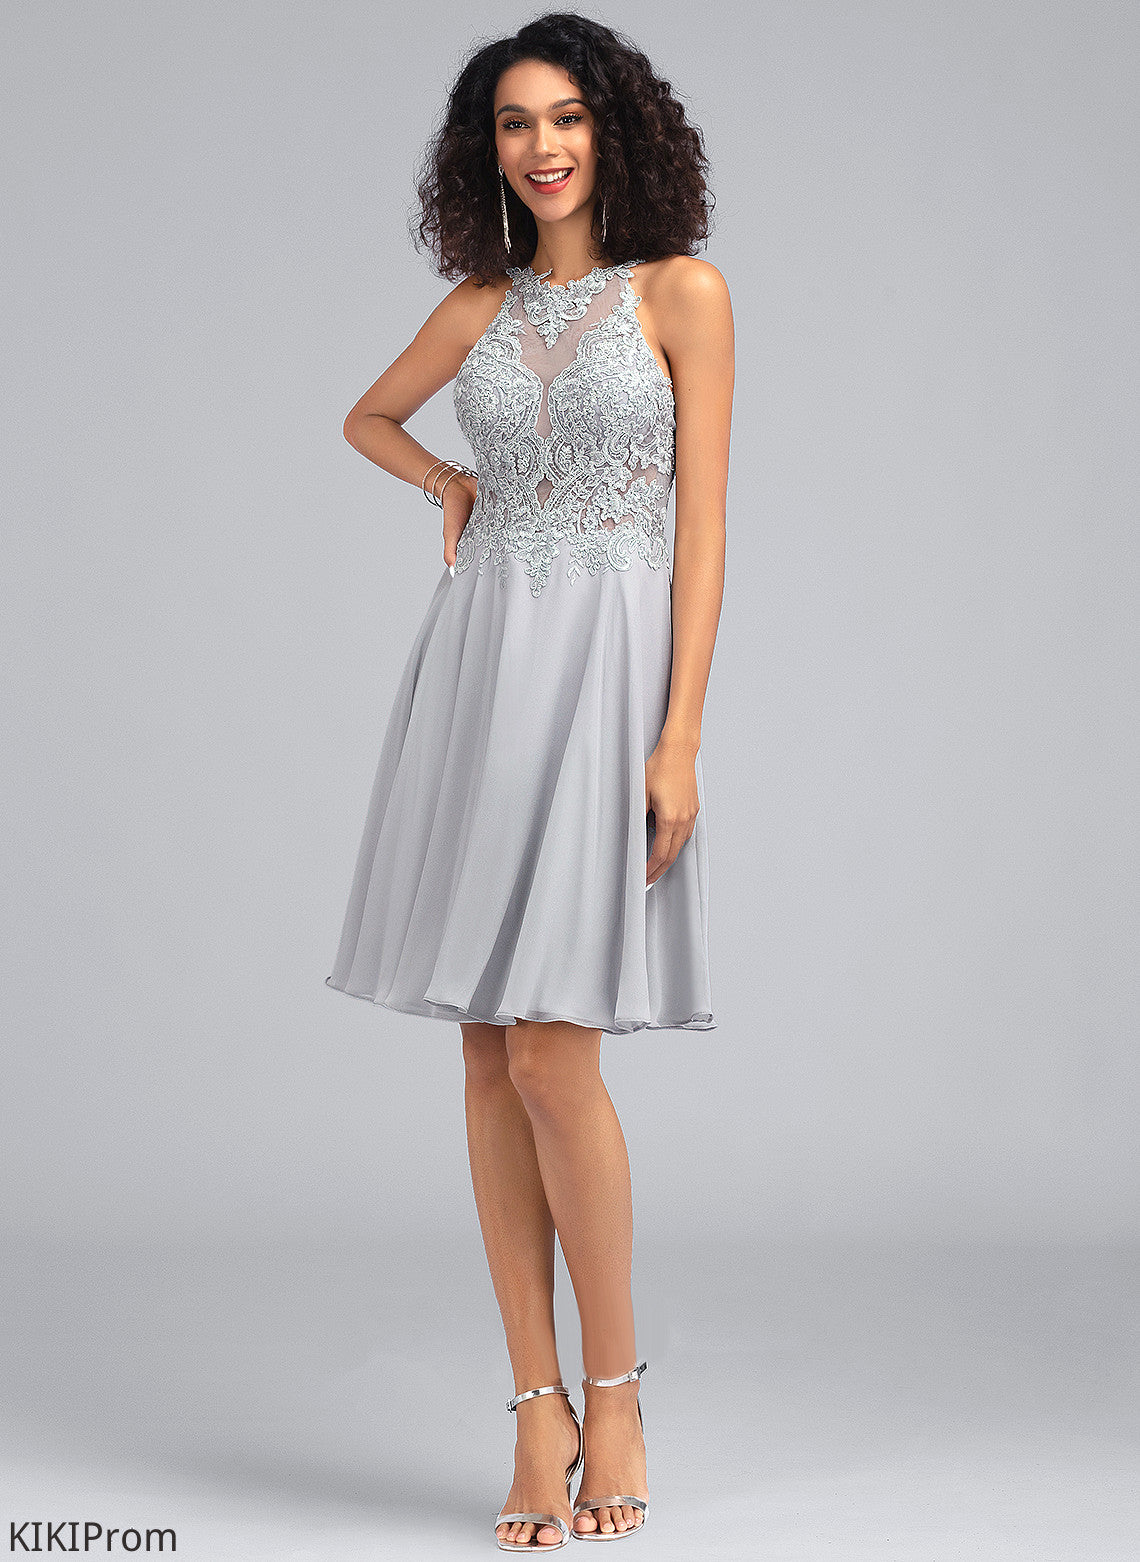 Dress A-Line With Homecoming Homecoming Dresses Kennedi Chiffon Knee-Length Neck Sequins Scoop